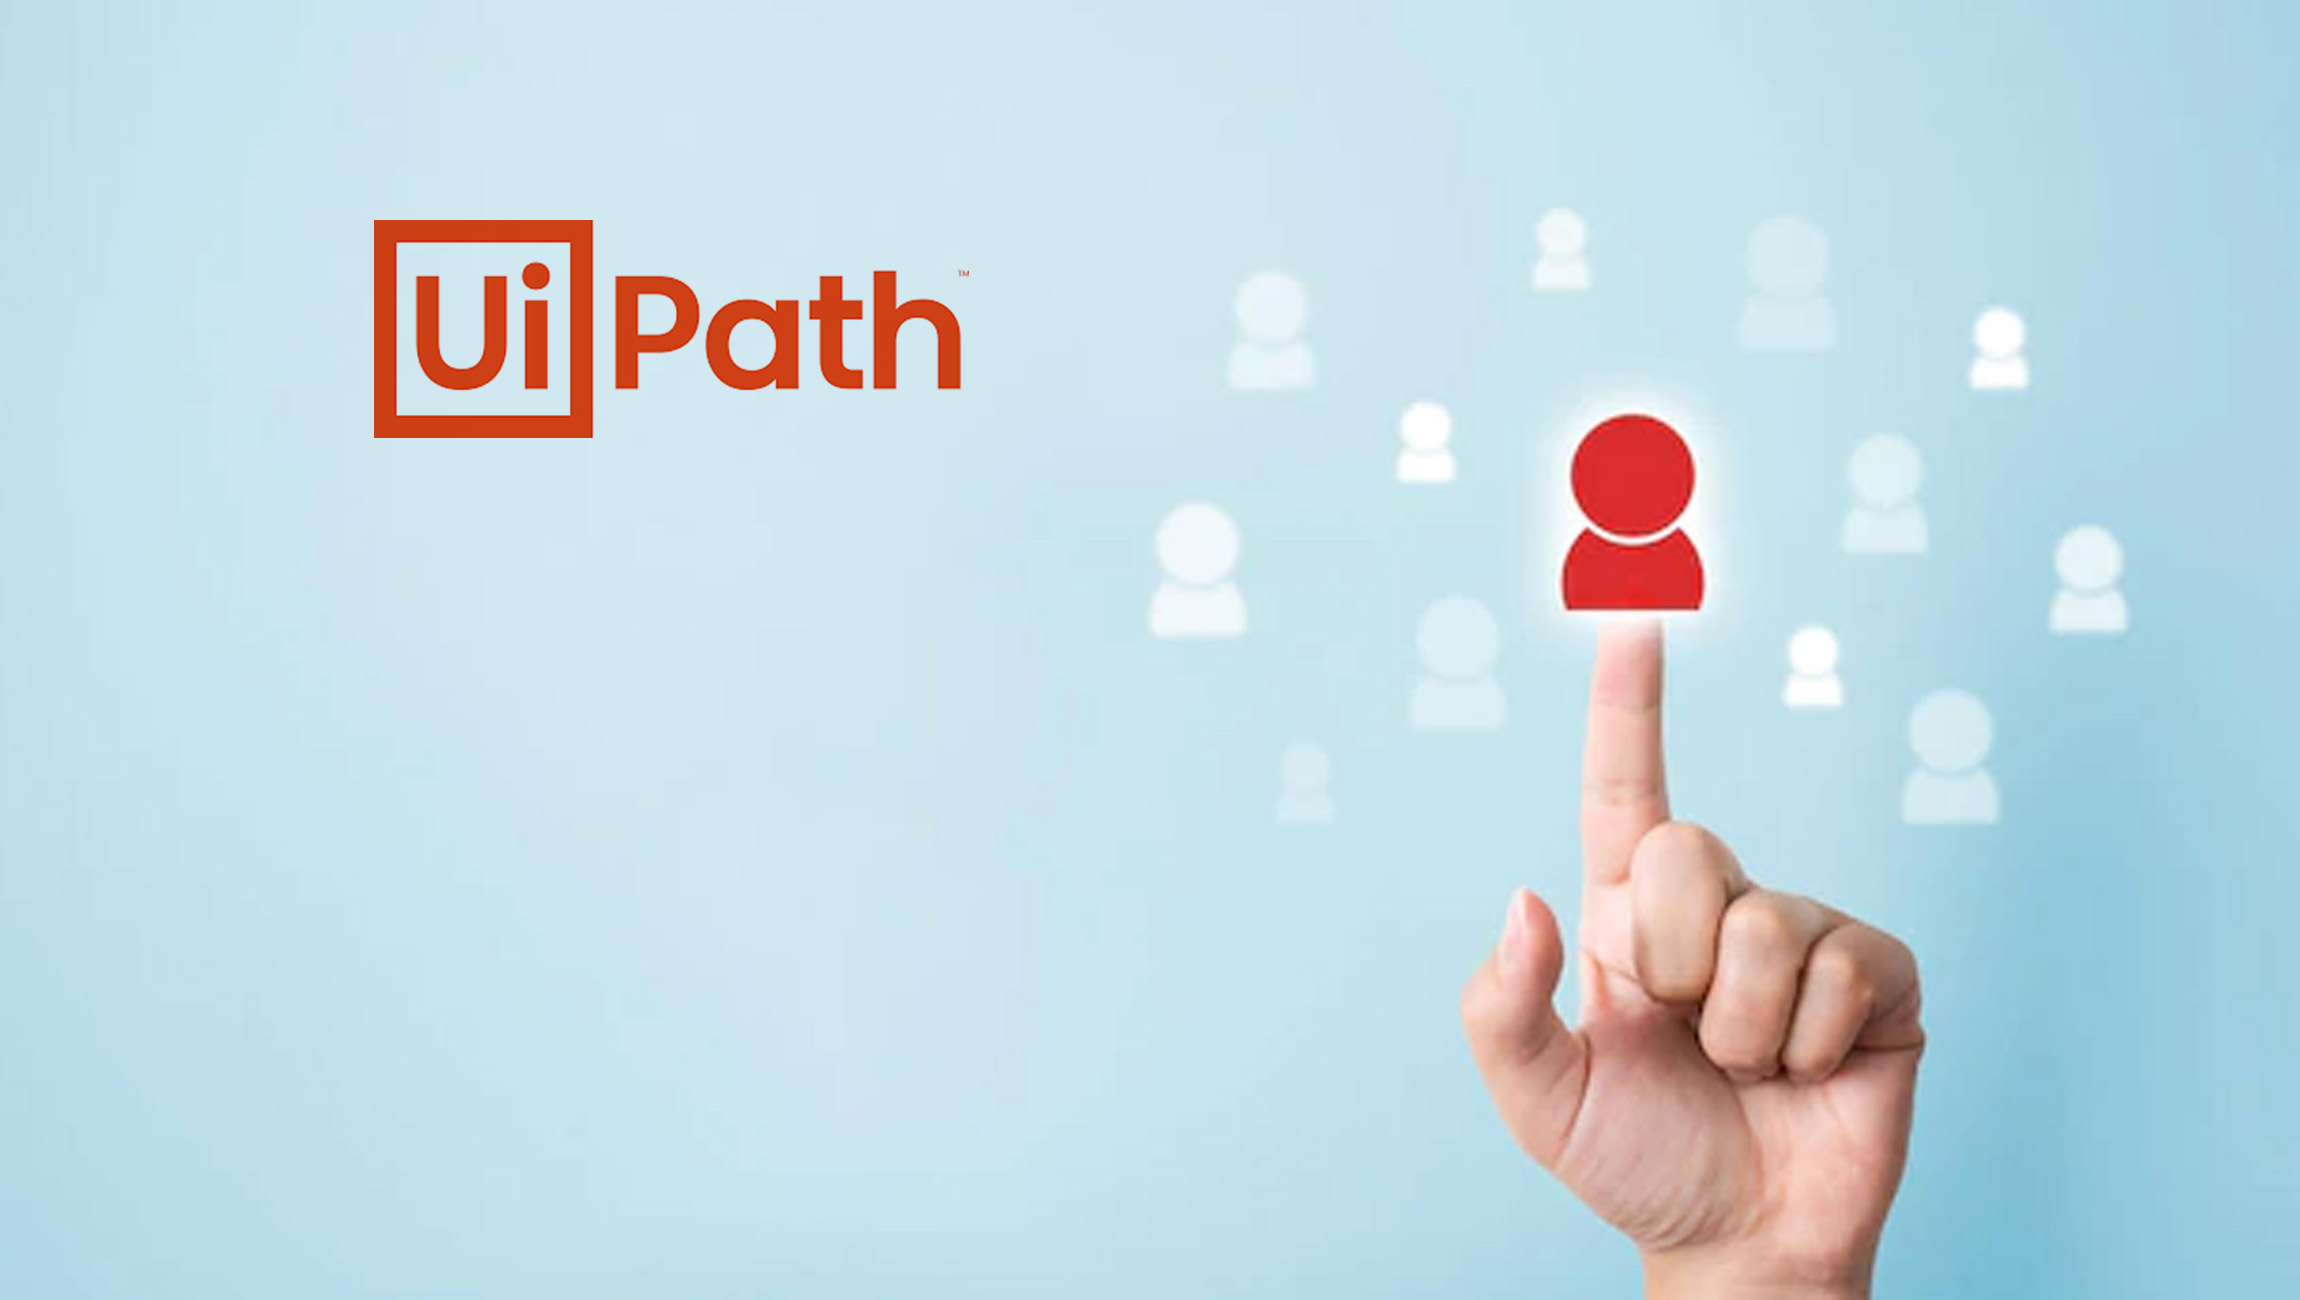 UiPath Appoints Robert Enslin as Co-Chief Executive Officer 1